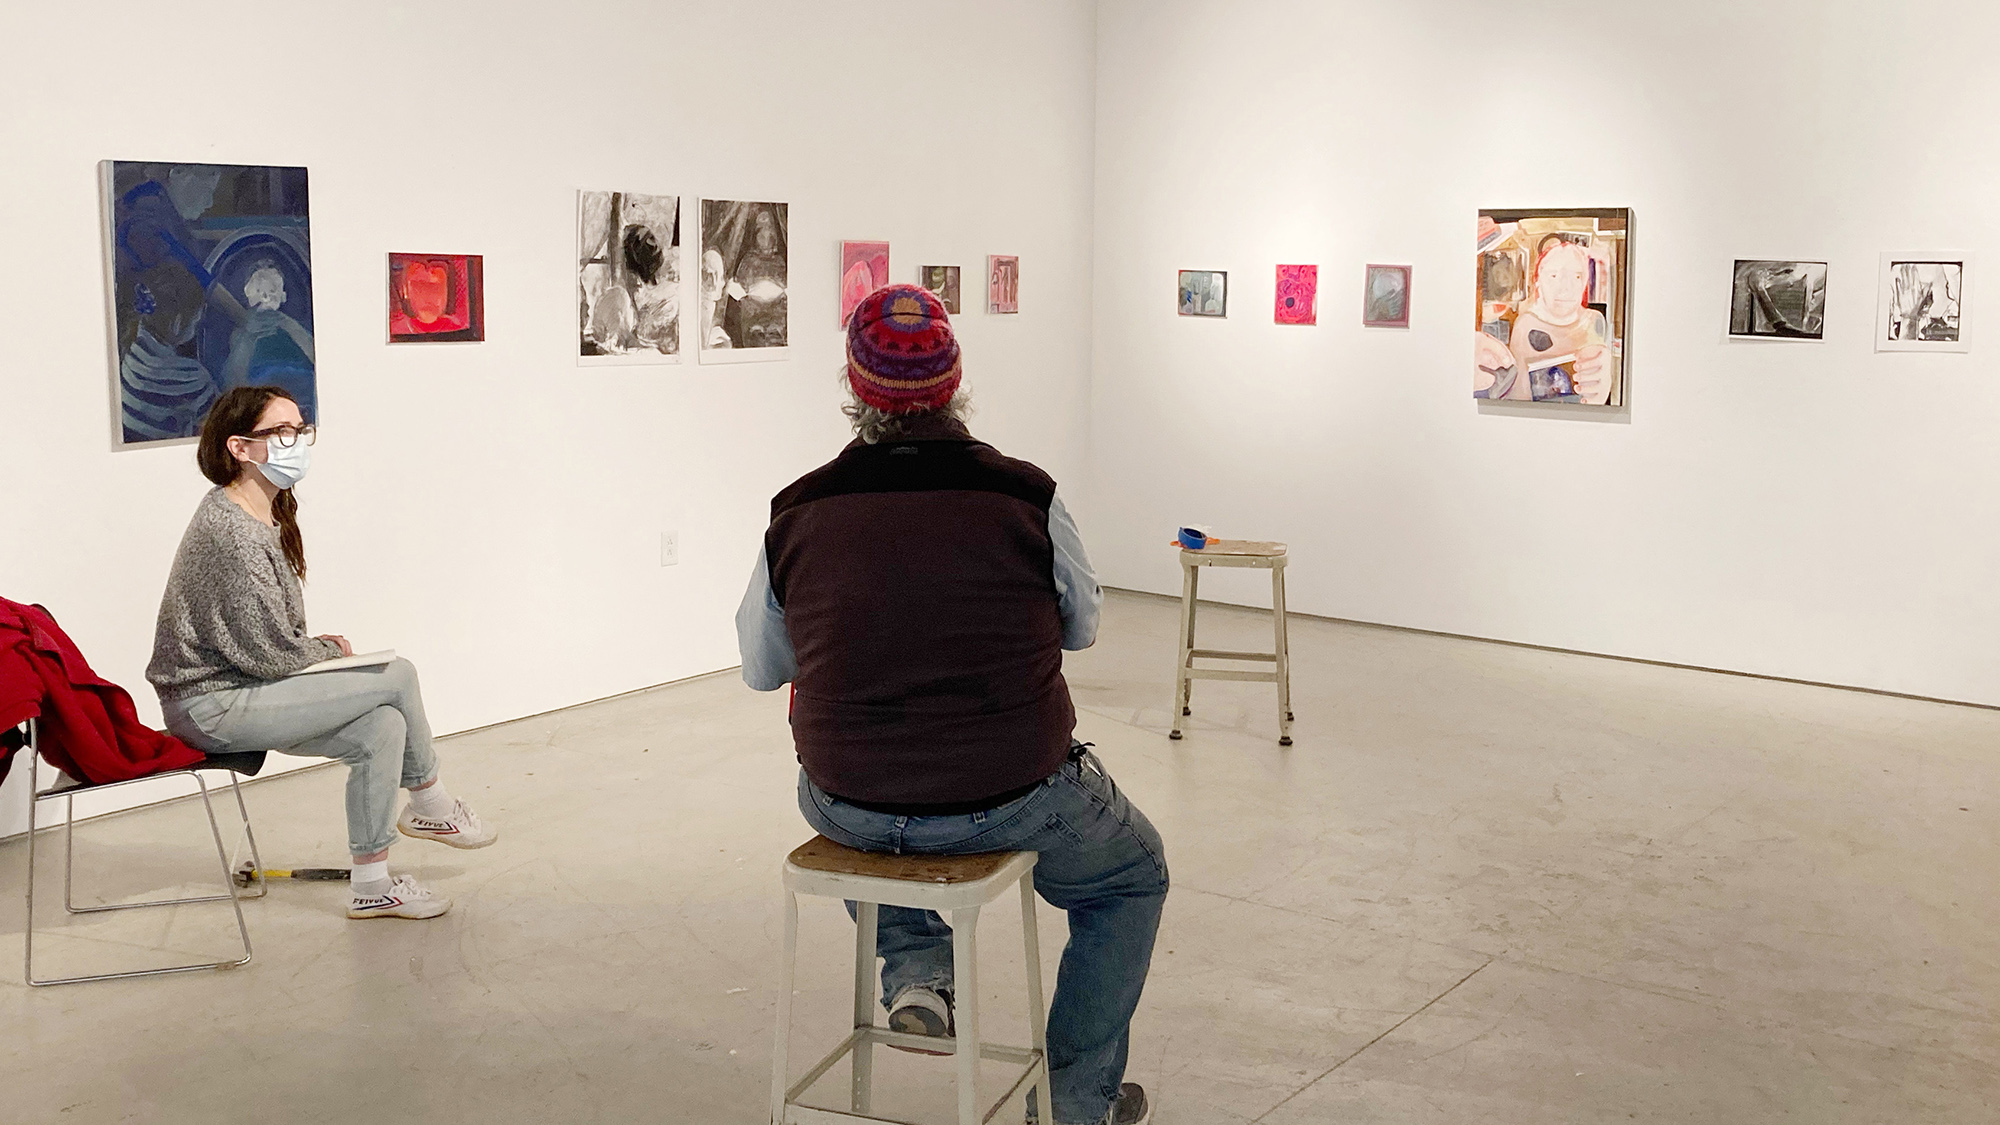 Two people sitting in an art studio in front of paintings and works on paper.